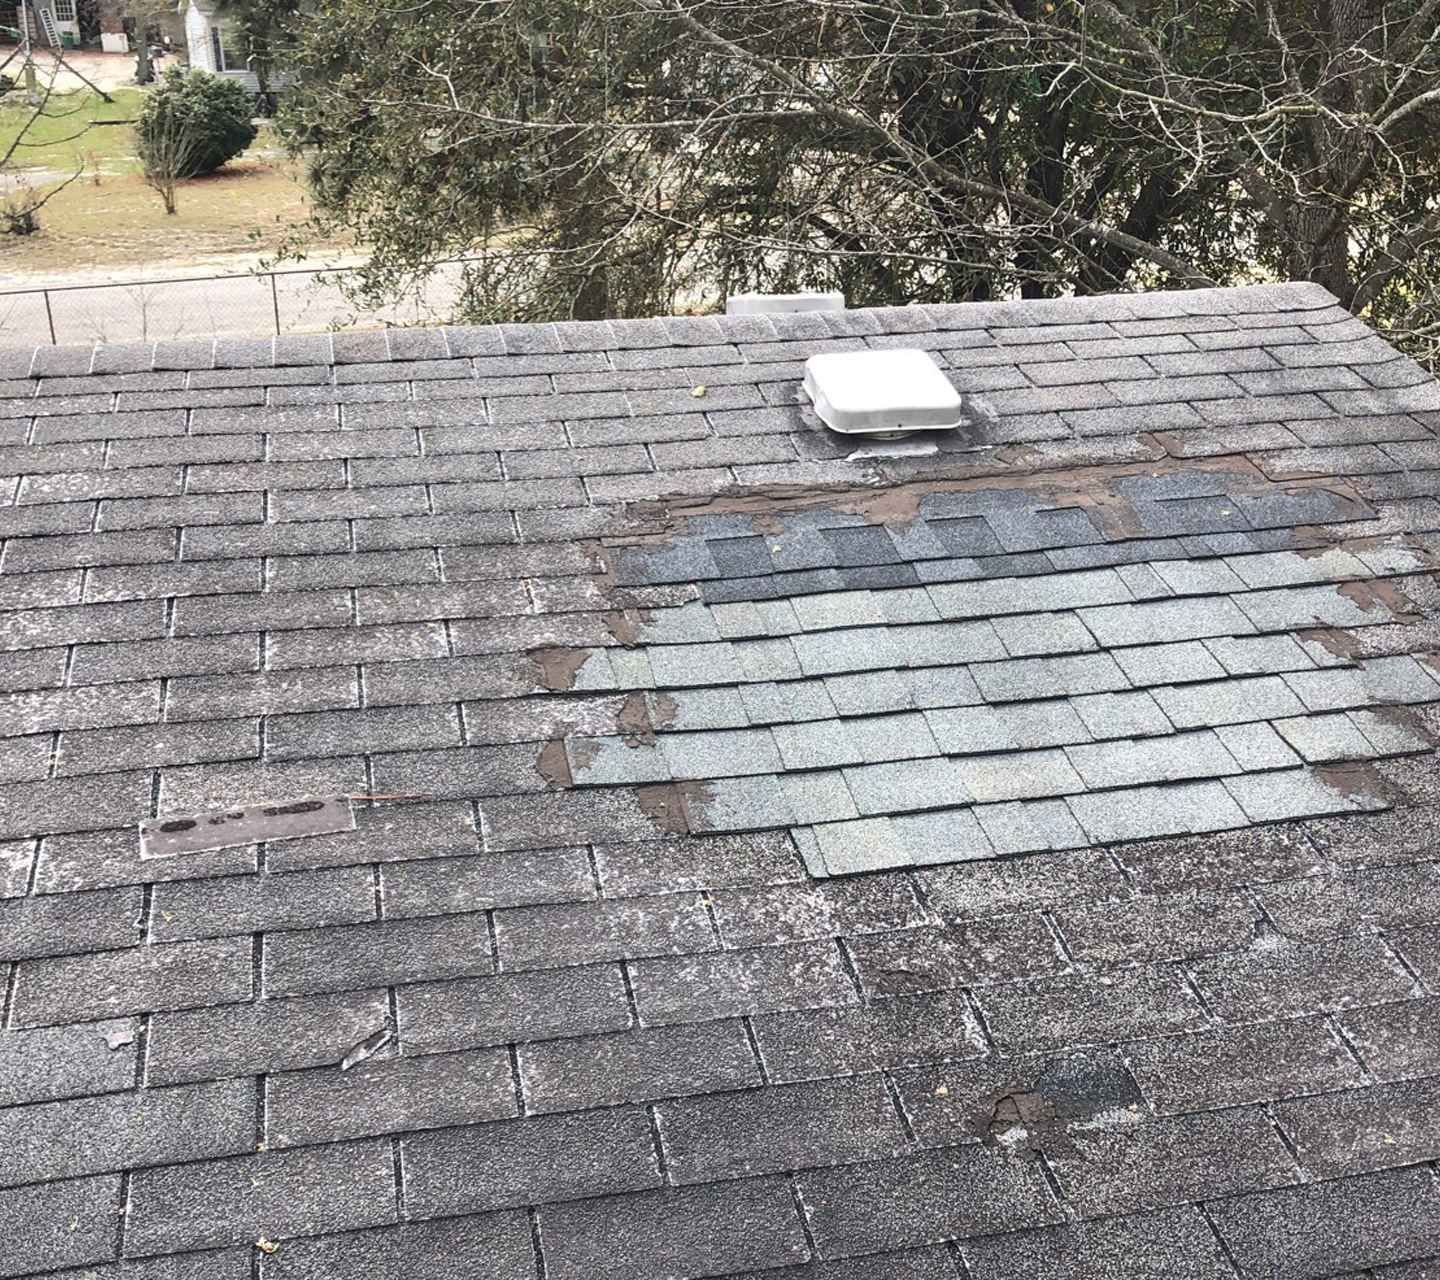 Roof patch looking rough.